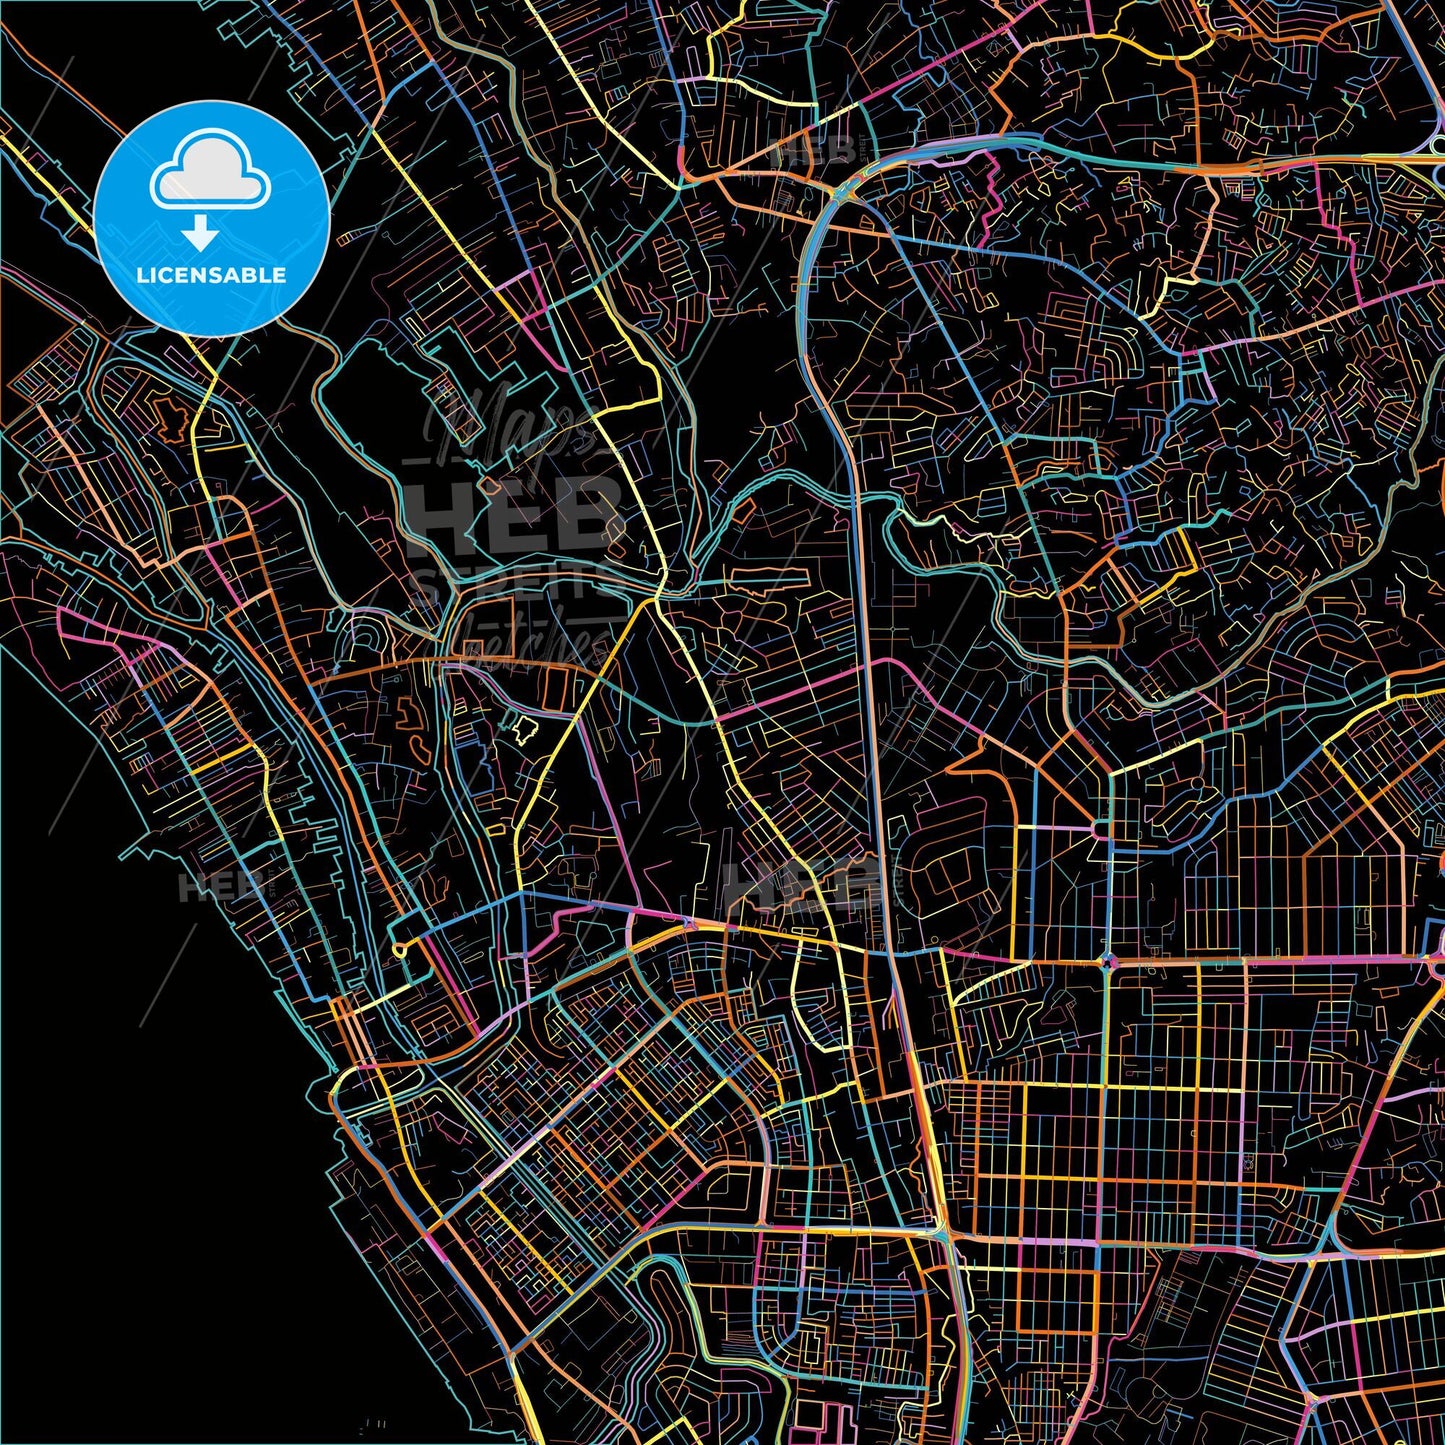 Malabon, Philippines, colorful city map on black background